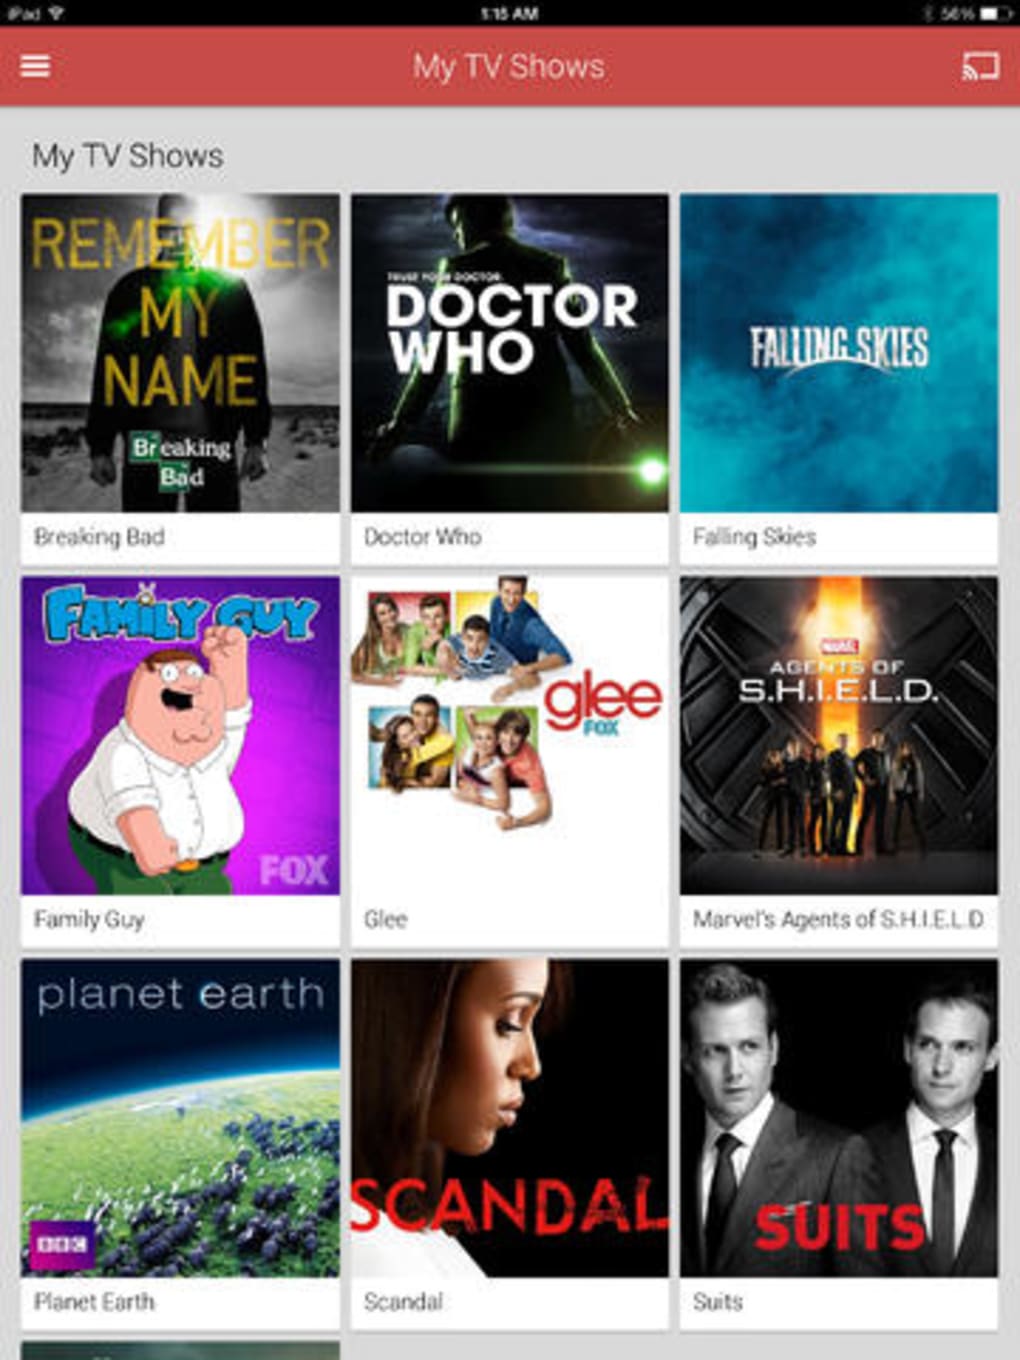 Series Flix: Movies & TV Shows - Apps on Google Play